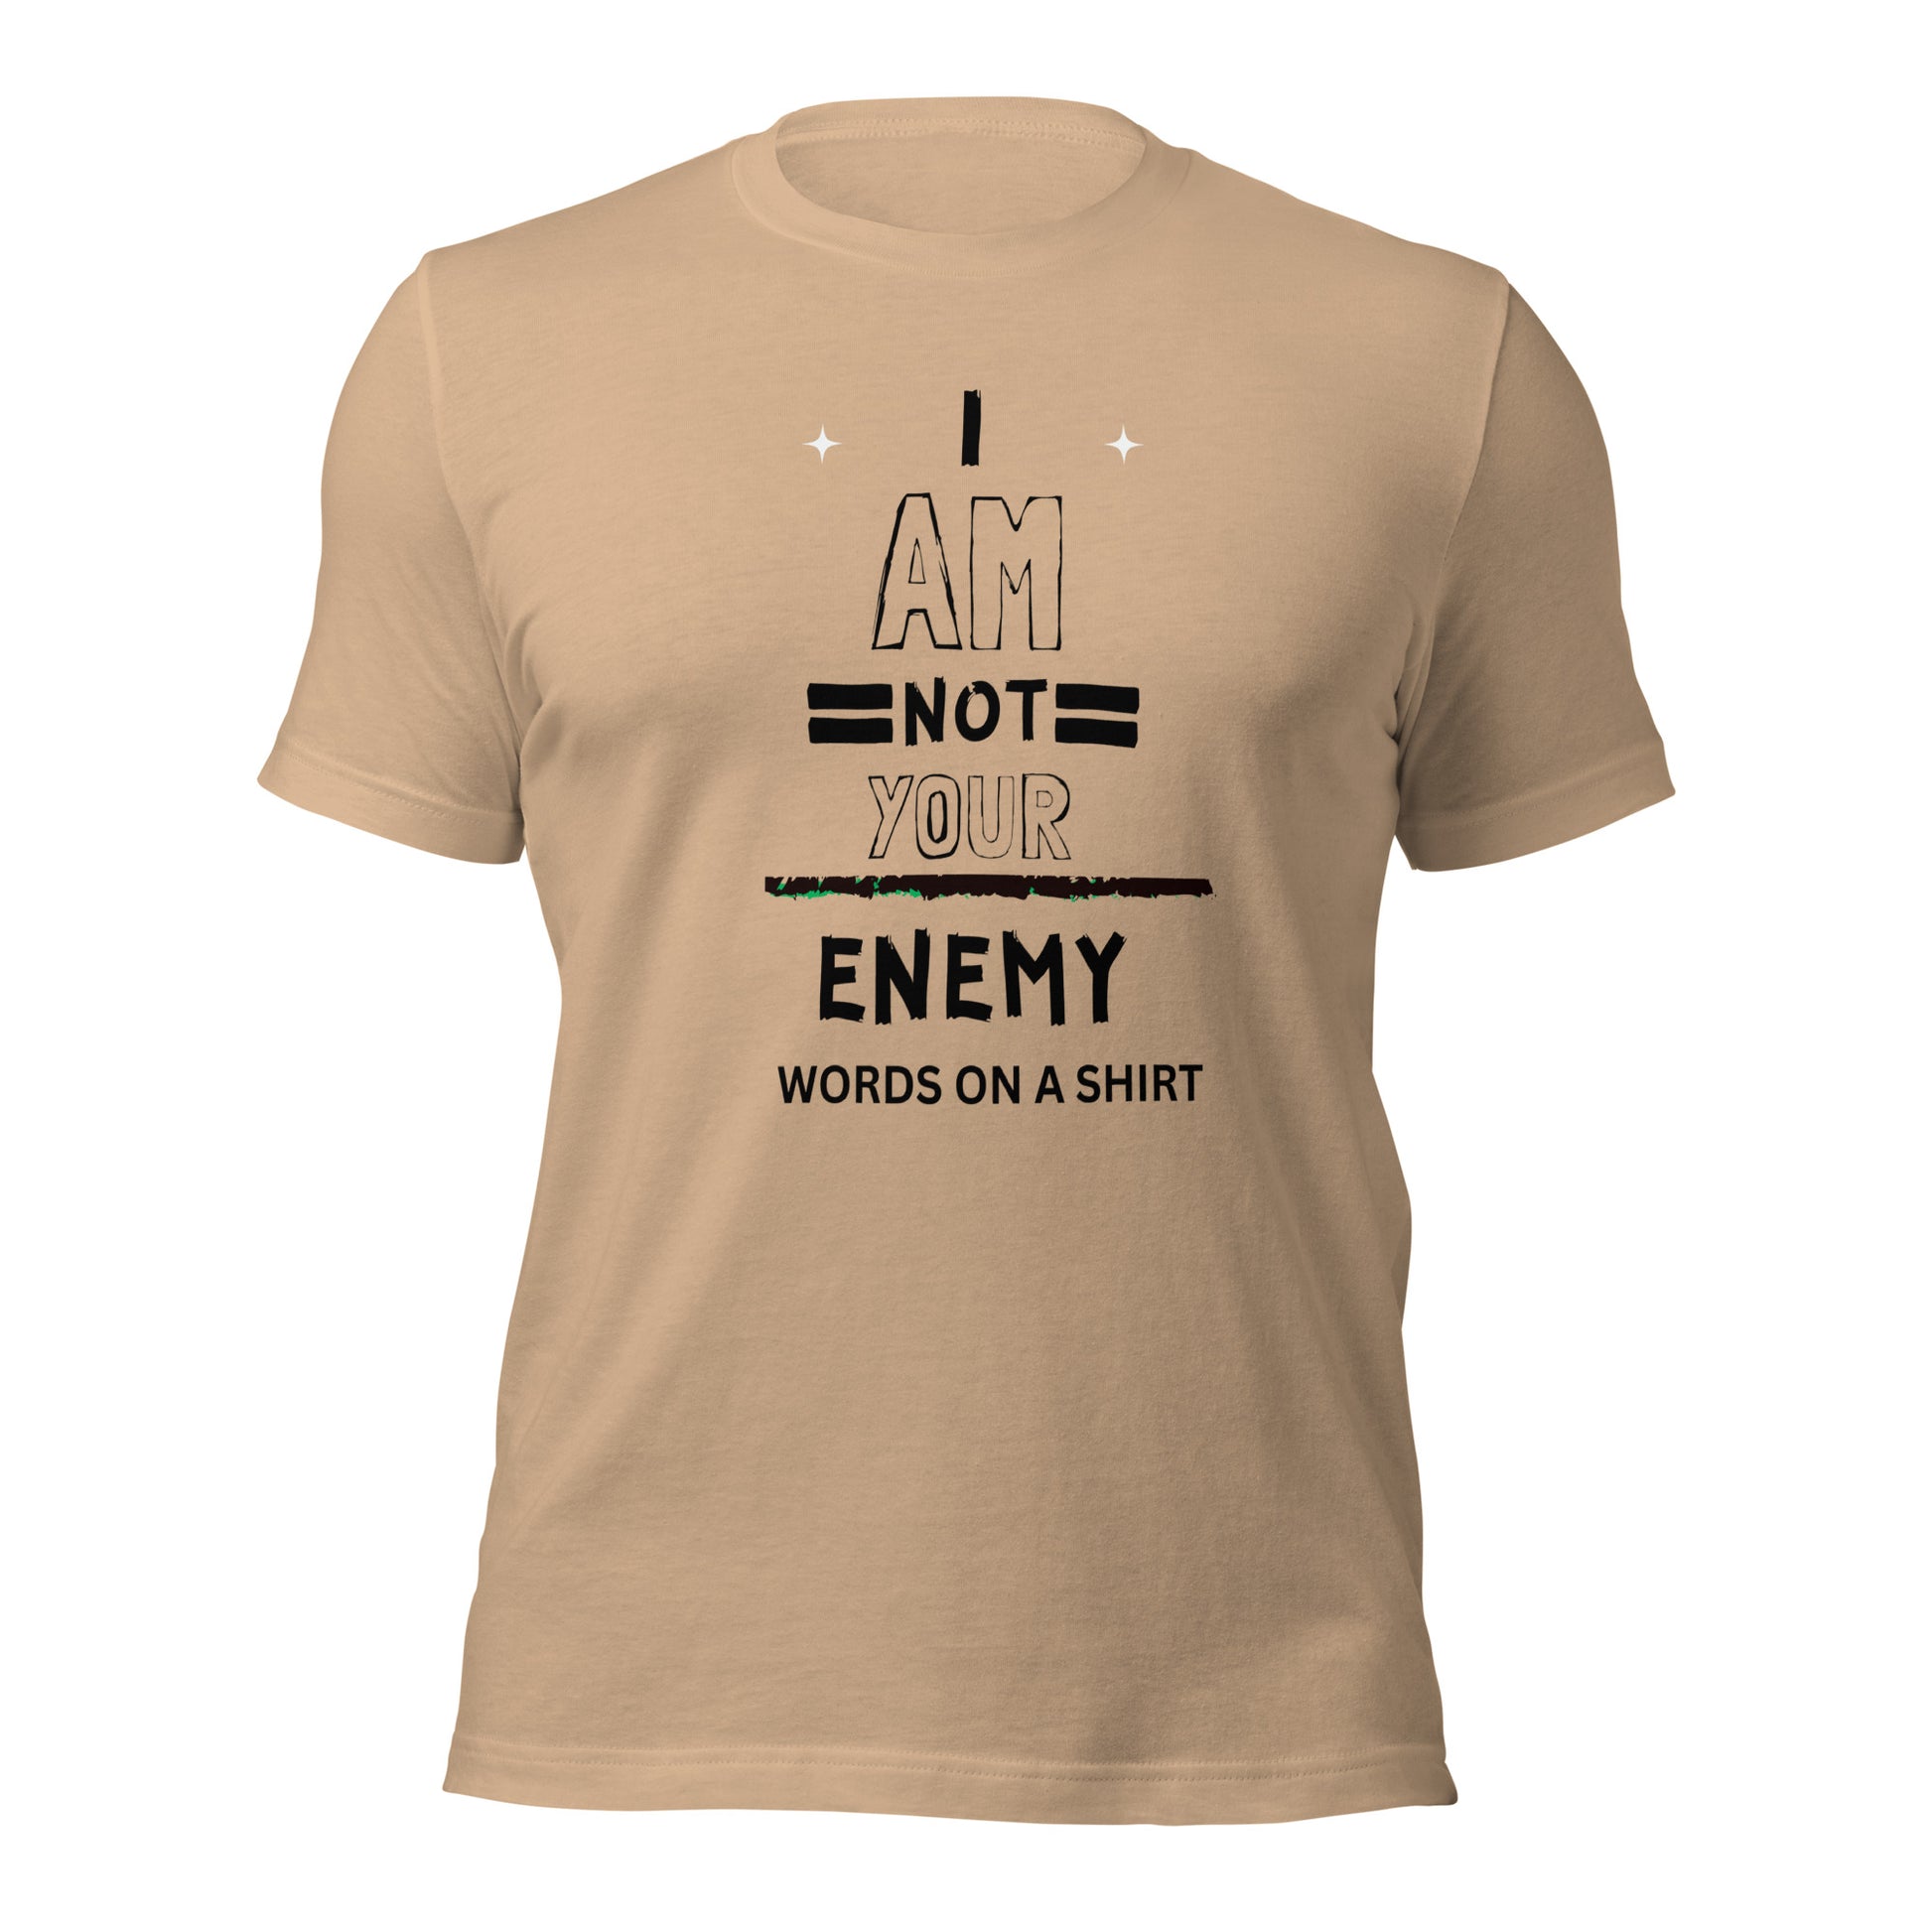 Don't fall for the same old t-shirts, this one stands out from the rest. Its exceptional comfort, breathability, and ideal stretch make it truly unique. And as a bonus, it boldly states: I Am Not Your Enemy. Need I say more?